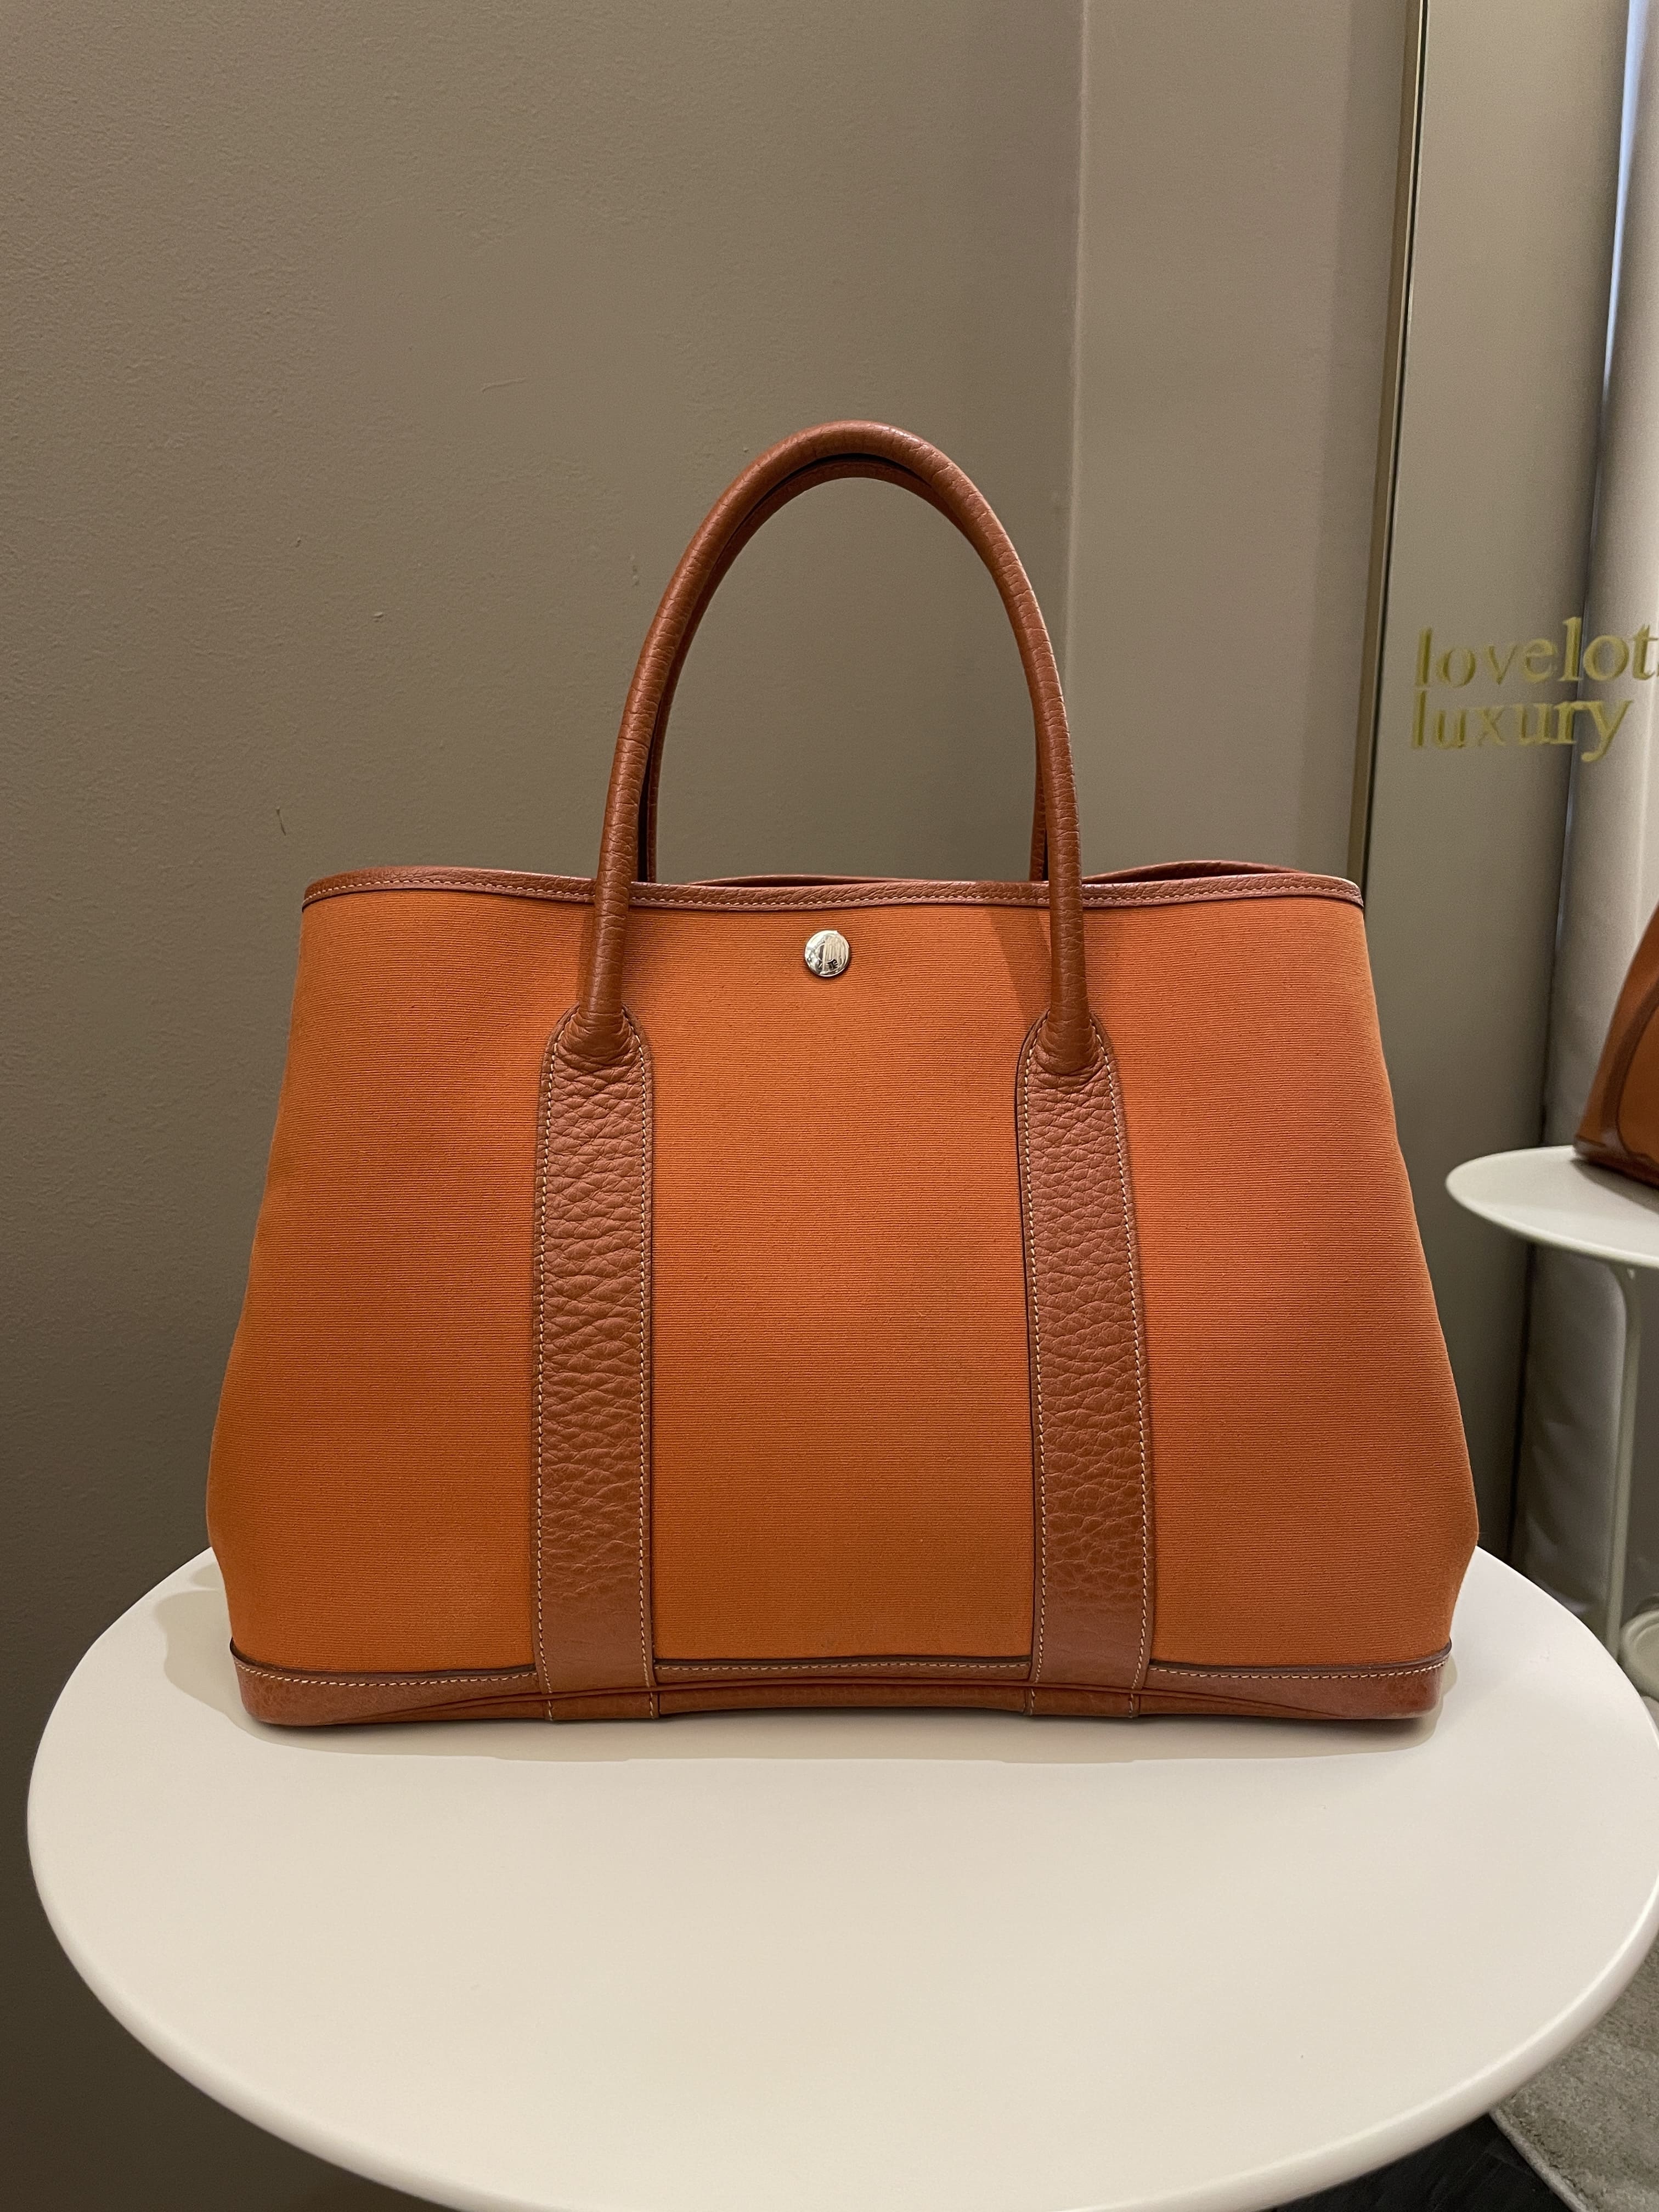 Hermes Garden Party Full Leather size 36 (Gold color), Luxury